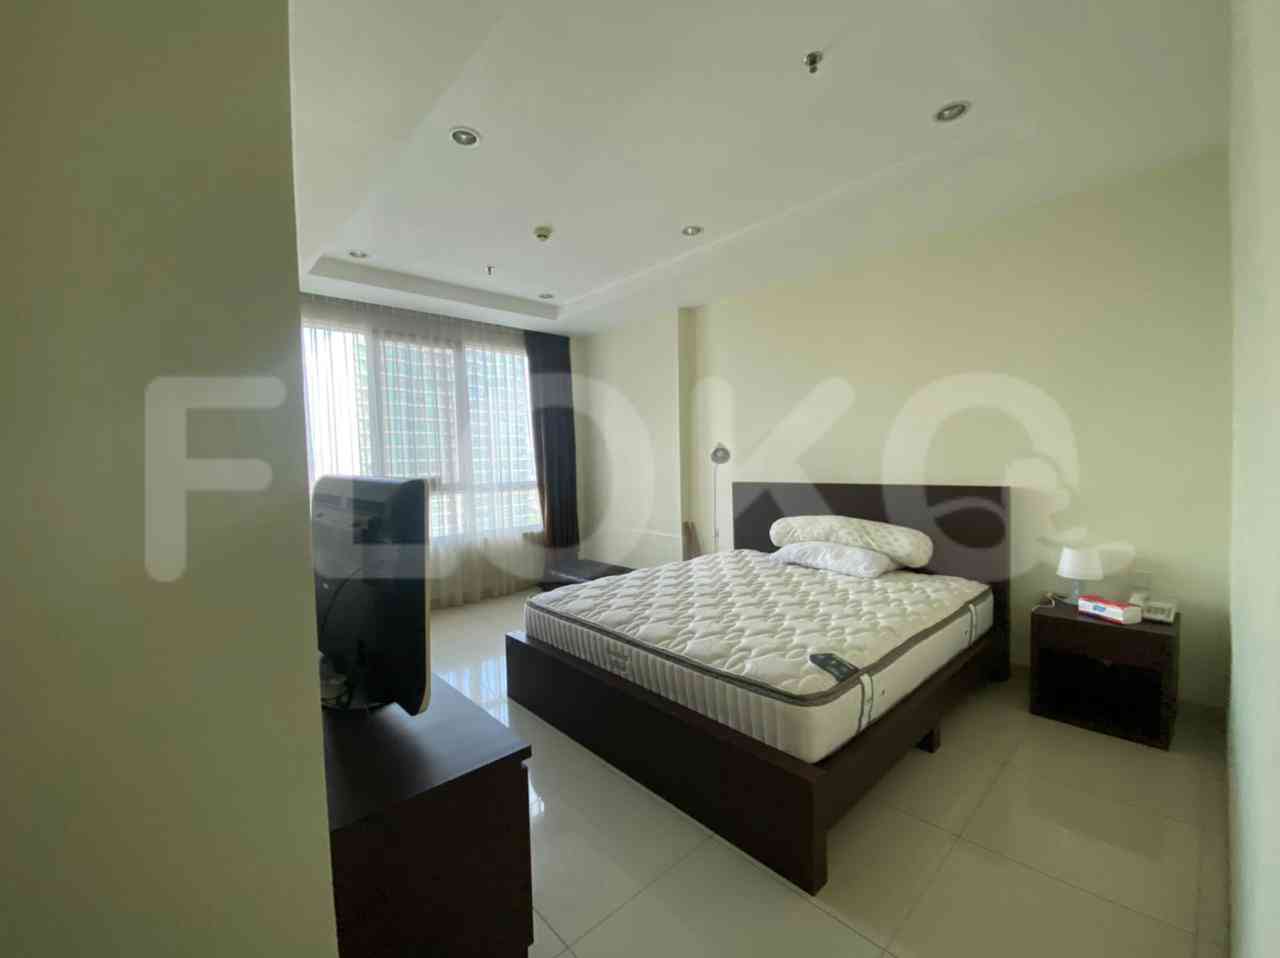 4 Bedroom on 26th Floor for Rent in Essence Darmawangsa Apartment - fci6f3 1